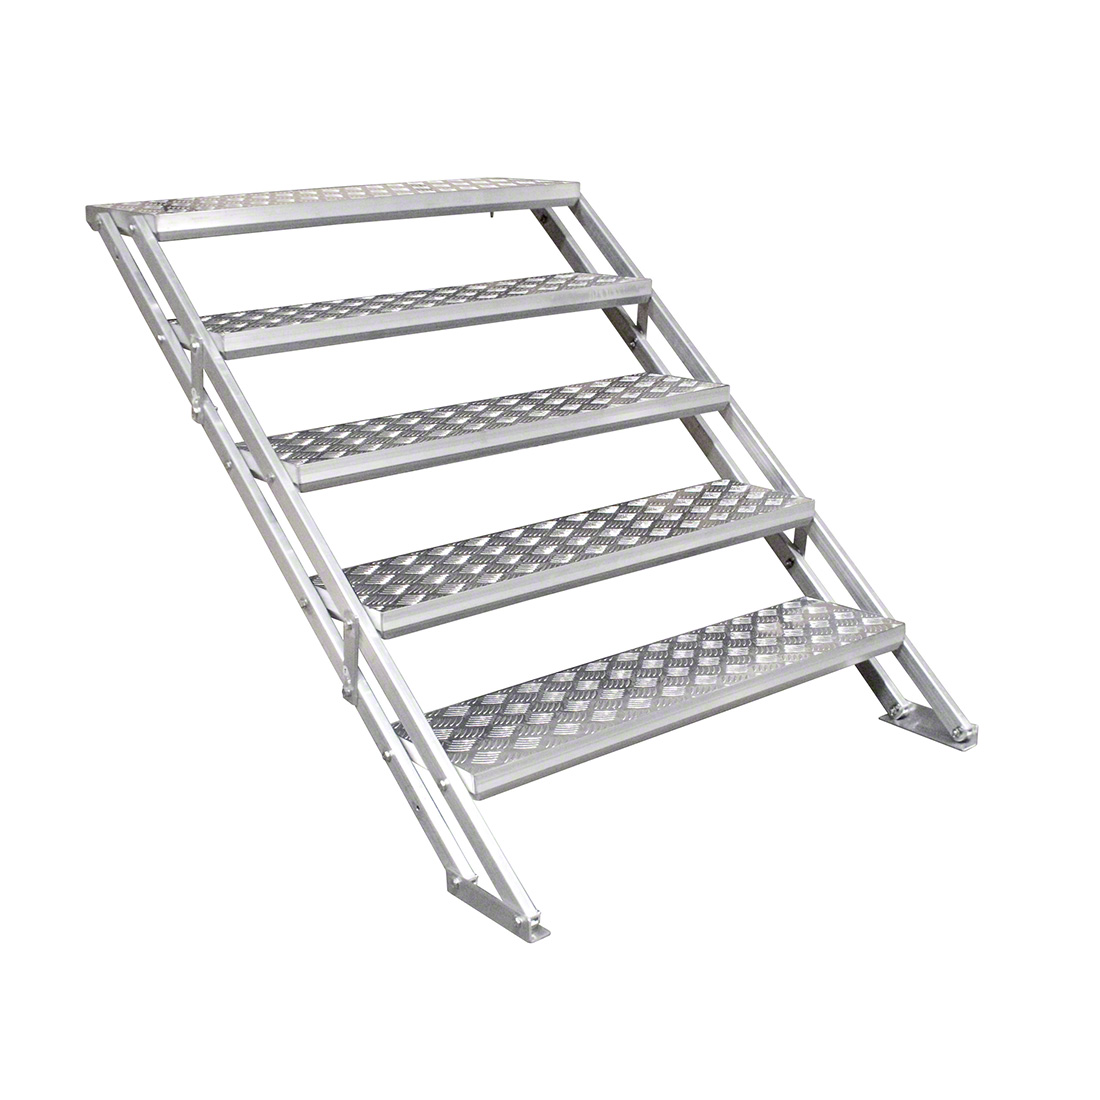 All-Terrain Stairs for 24"-48" Stage, Aluminum